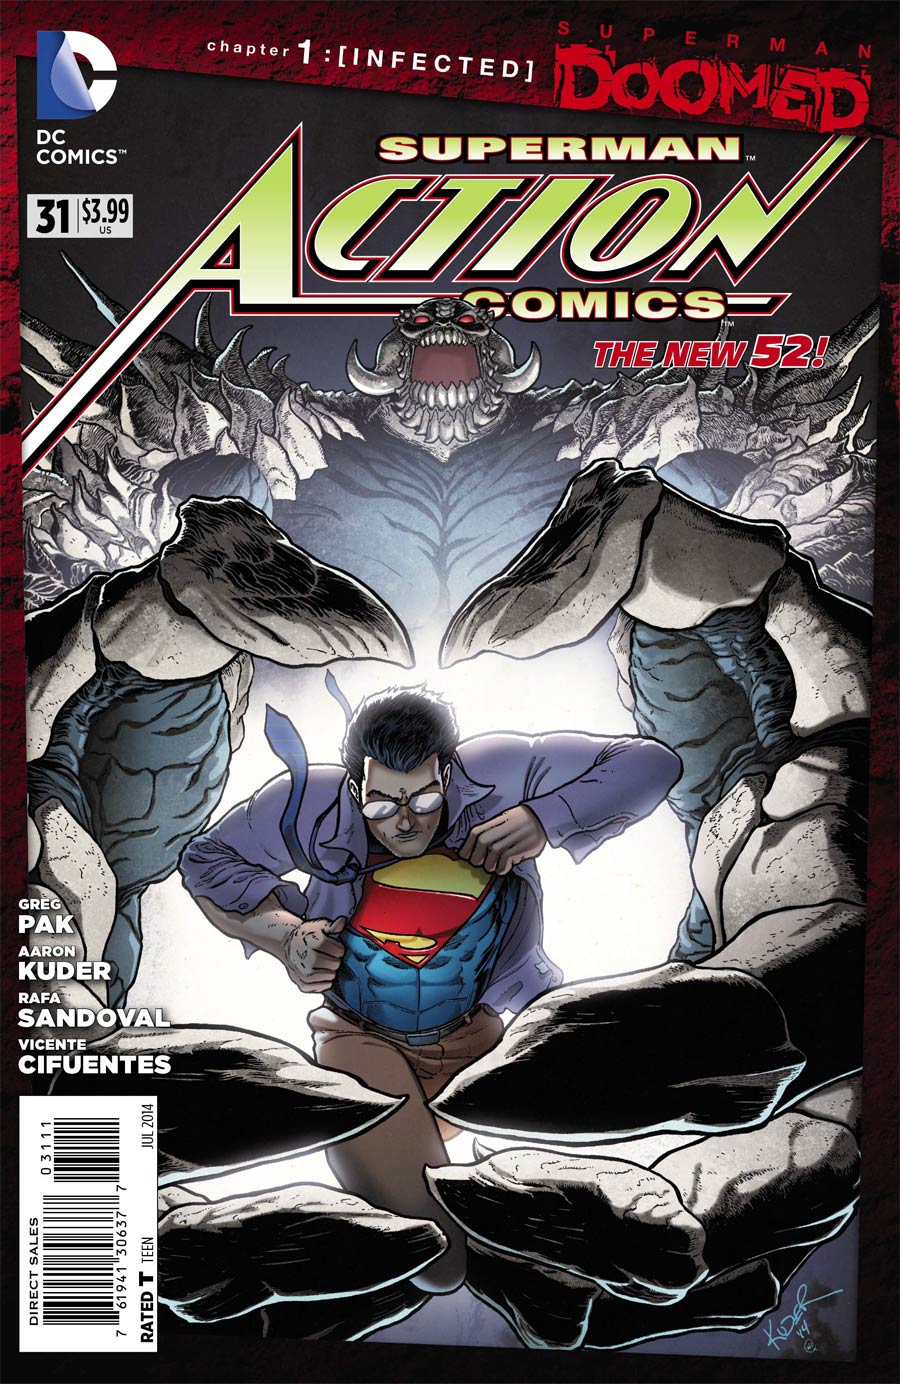 Action Comics Vol 2 #31 Cover A 1st Ptg Regular Aaron Kuder Cover (Superman Doomed Tie-In)